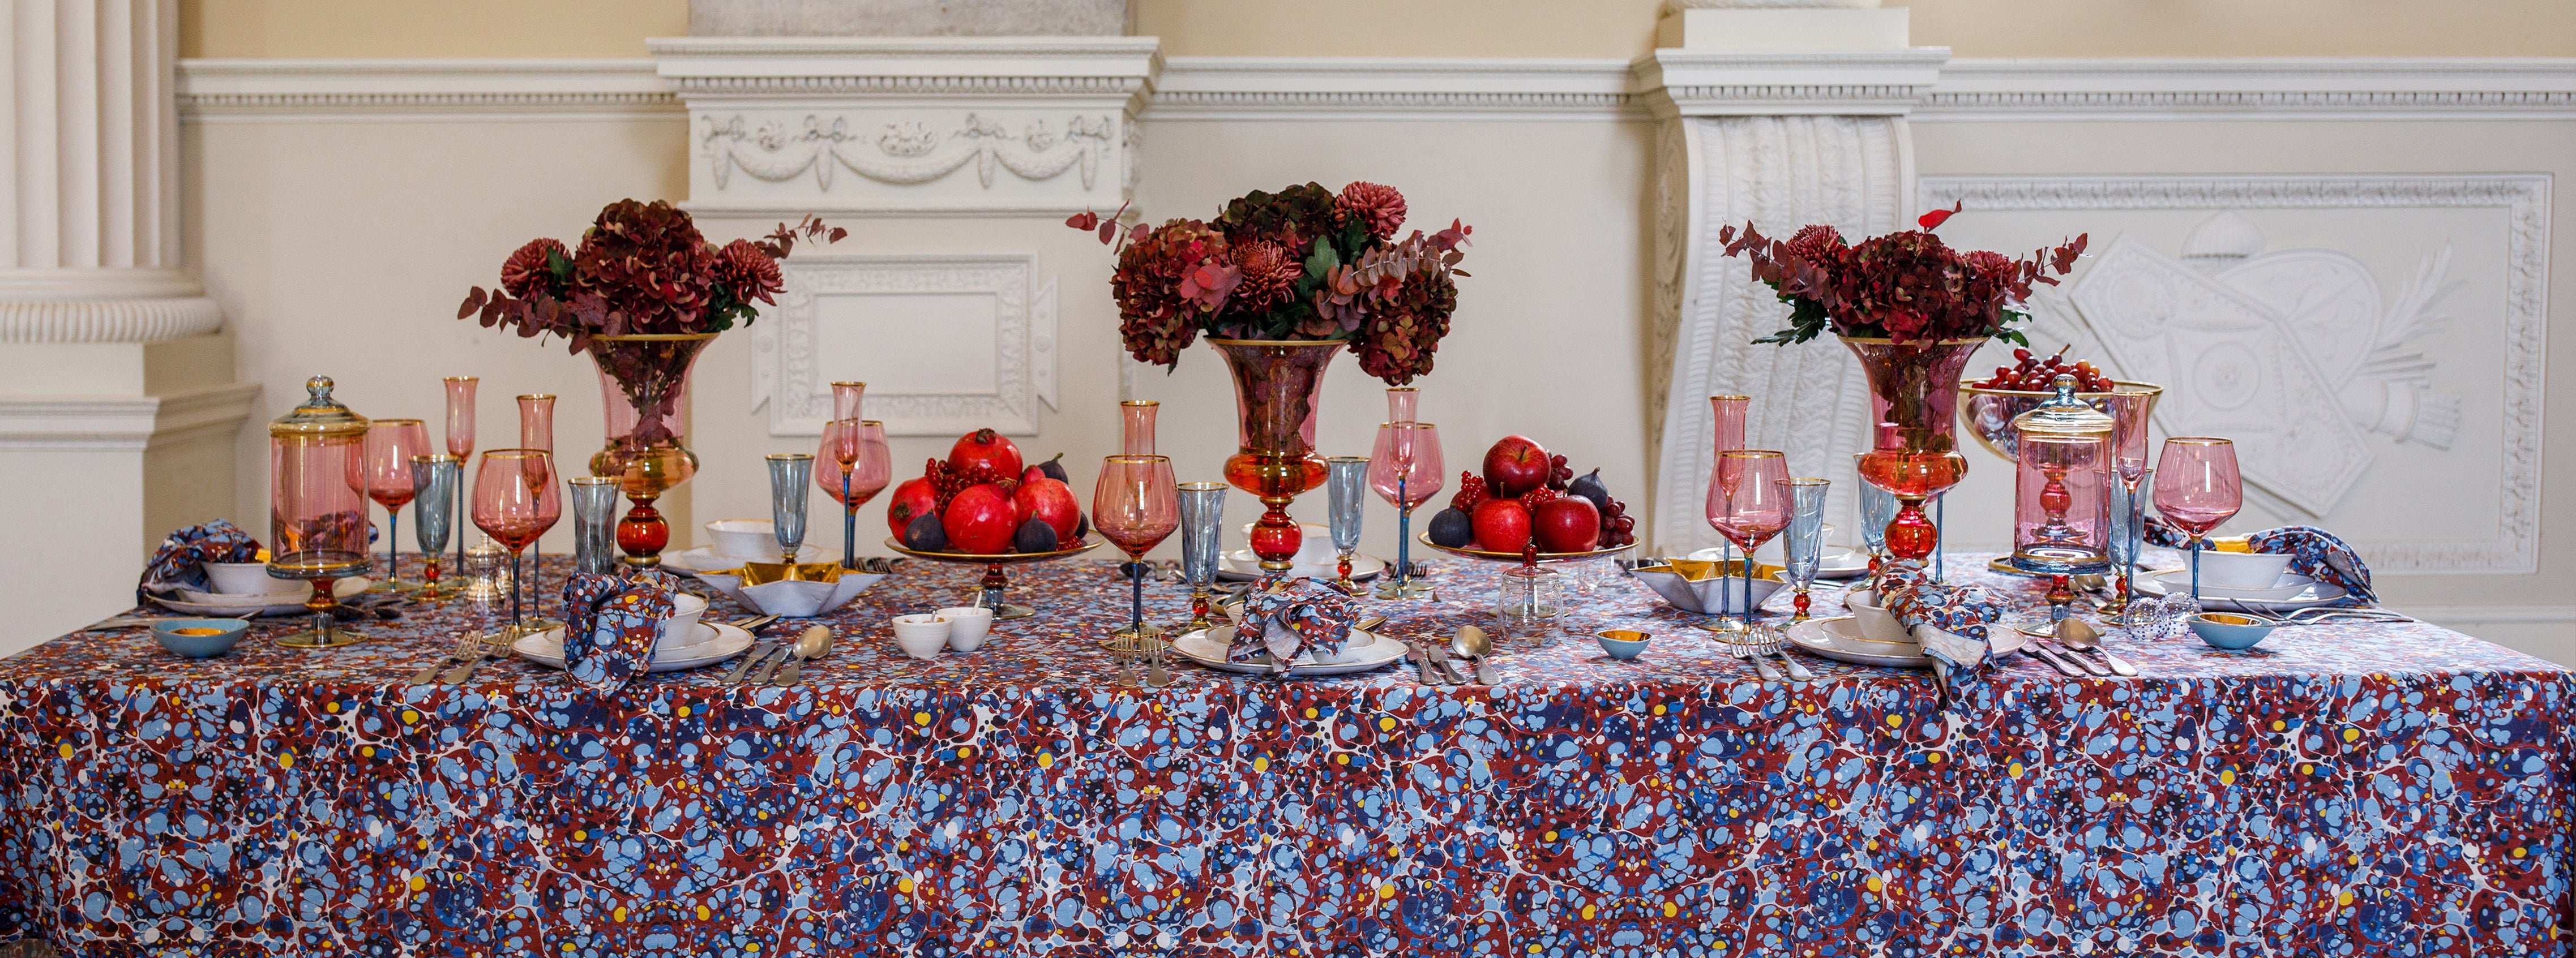 Summerill & Bishop 'Marble' Tablescape in Burgundy, Turquoise & Blue